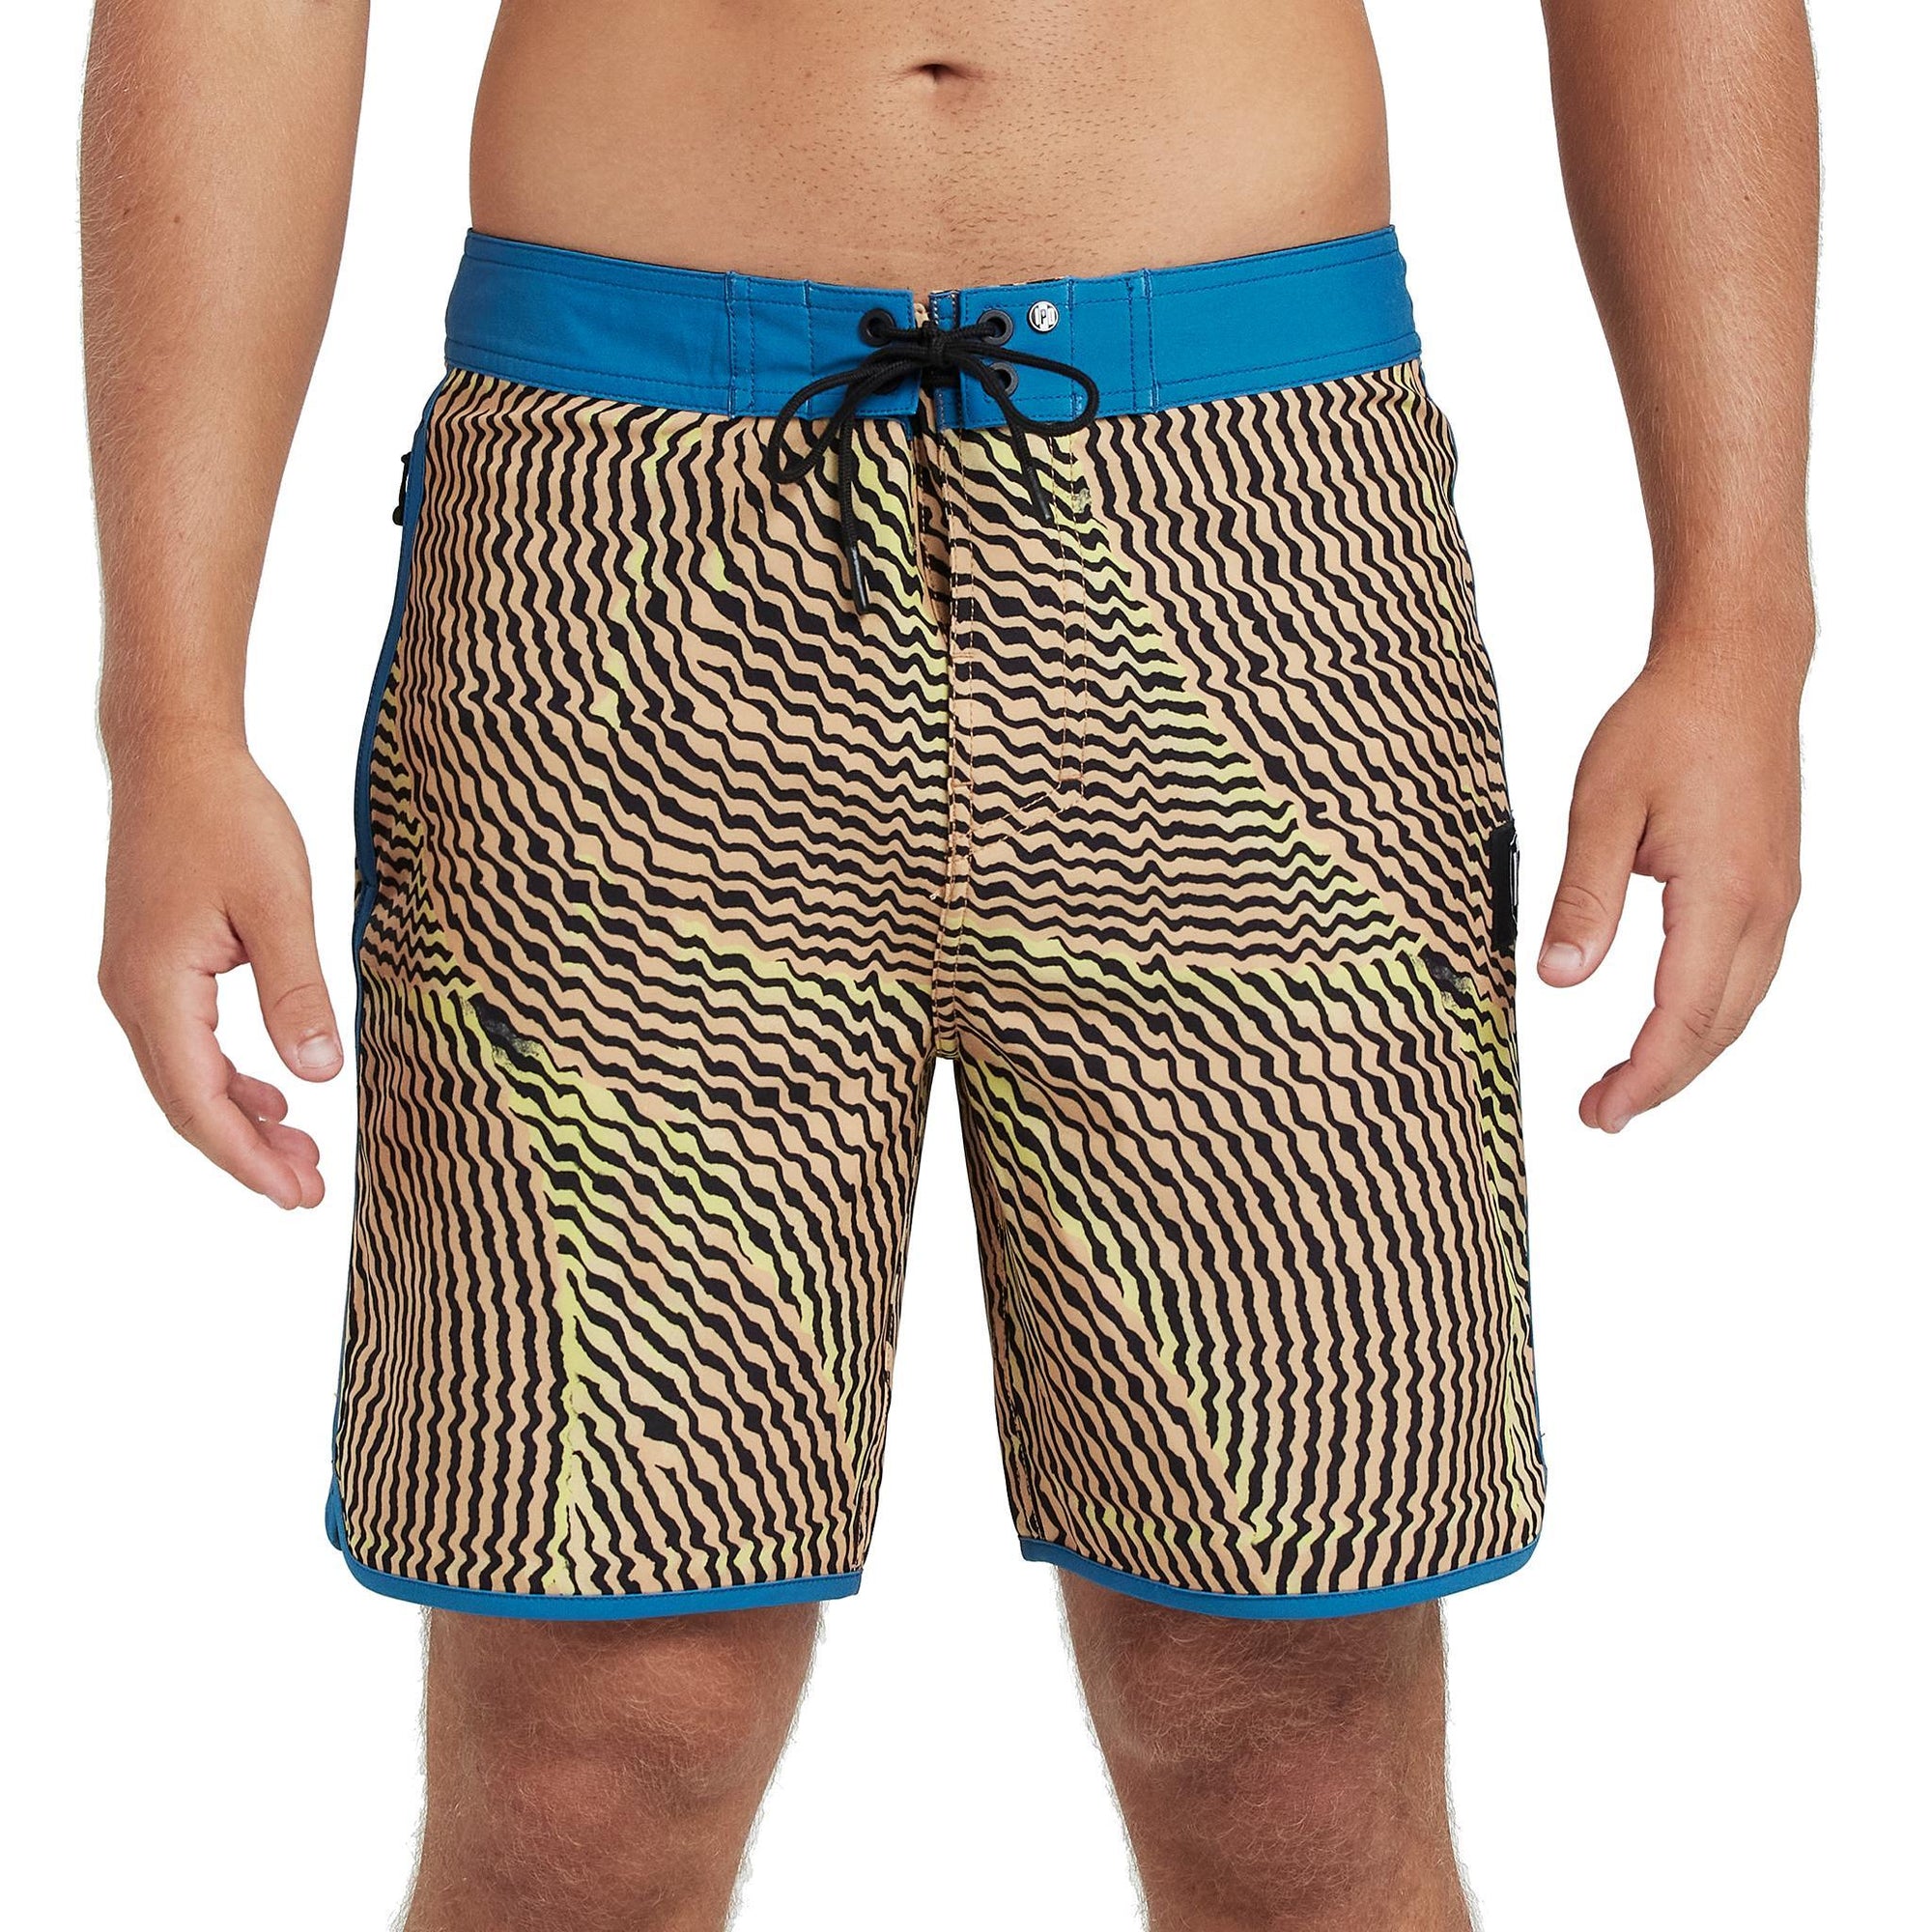 Front view of black and yellow abstract striped boardshorts mimicking sound frequency with light blue trim.